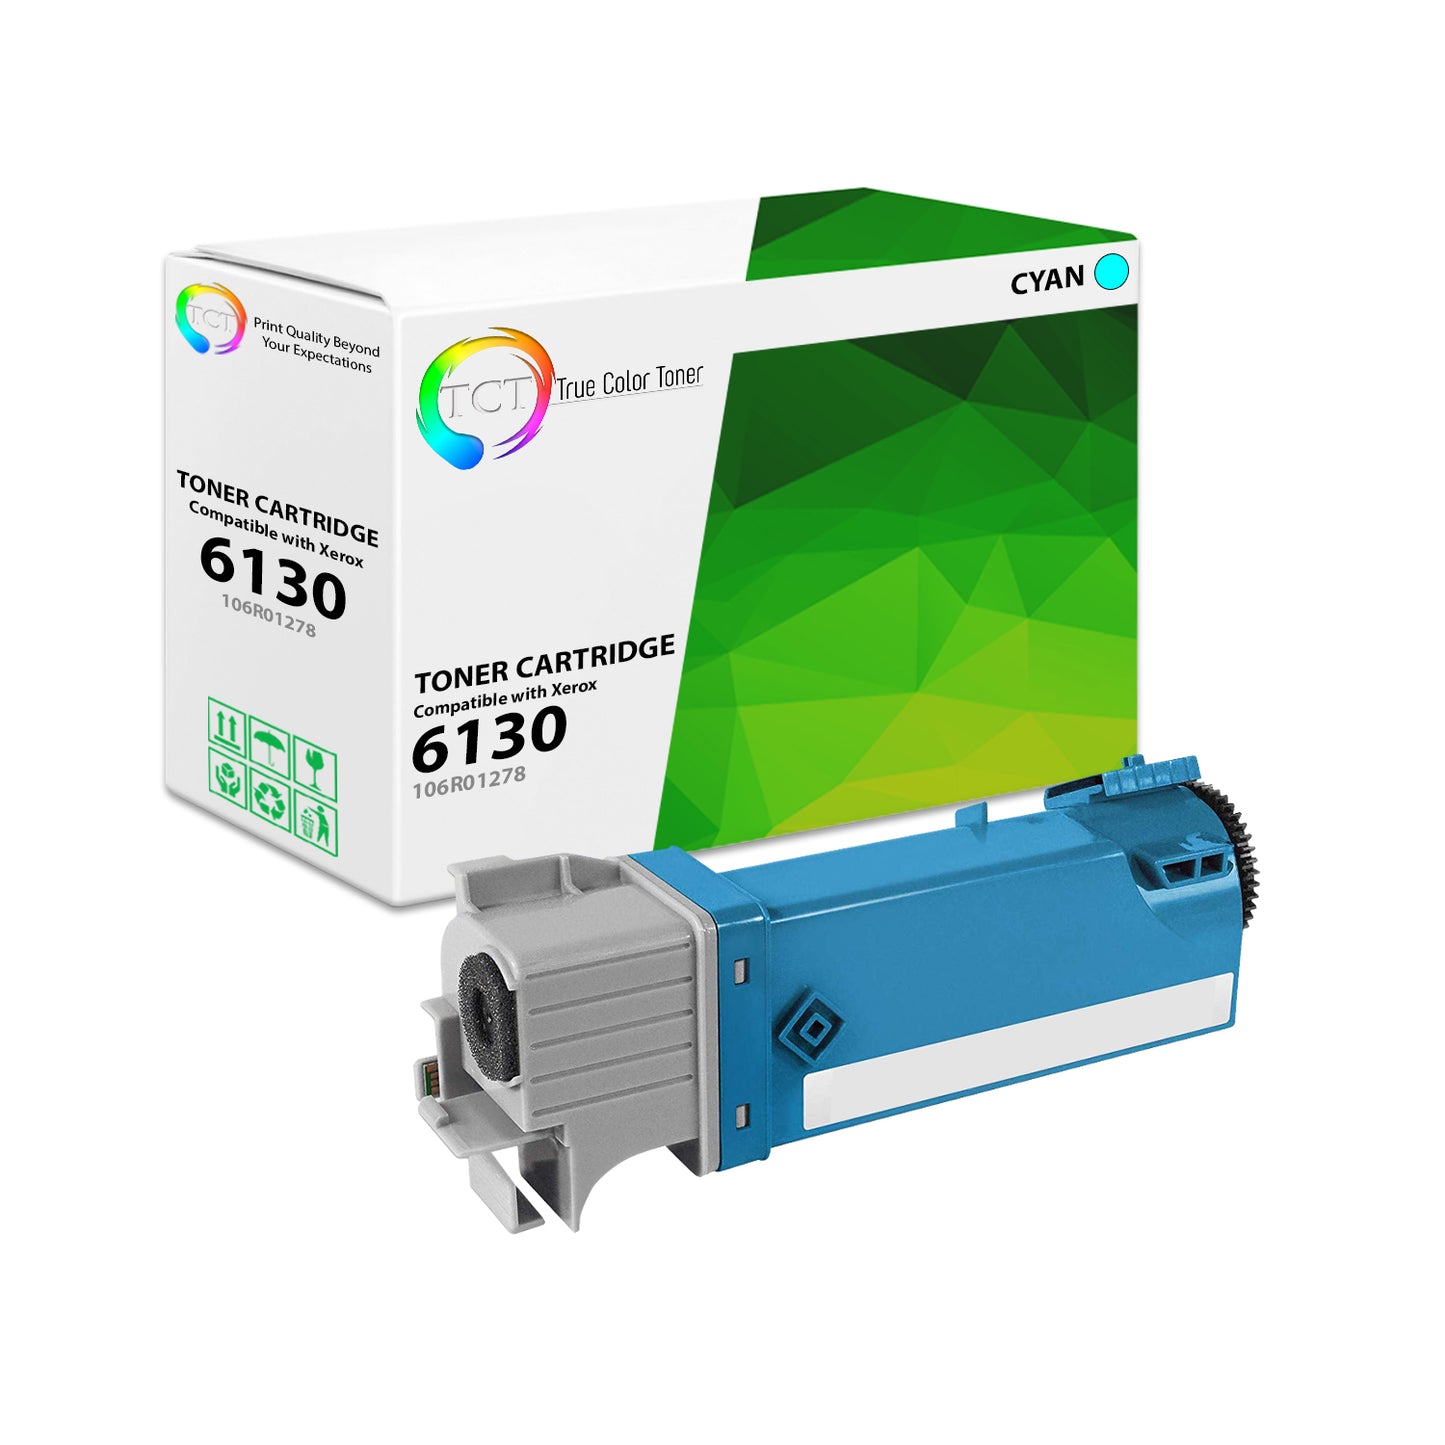 TCT Compatible Toner Cartridge Replacement for the Xerox 6130 Series - 1 Pack Cyan